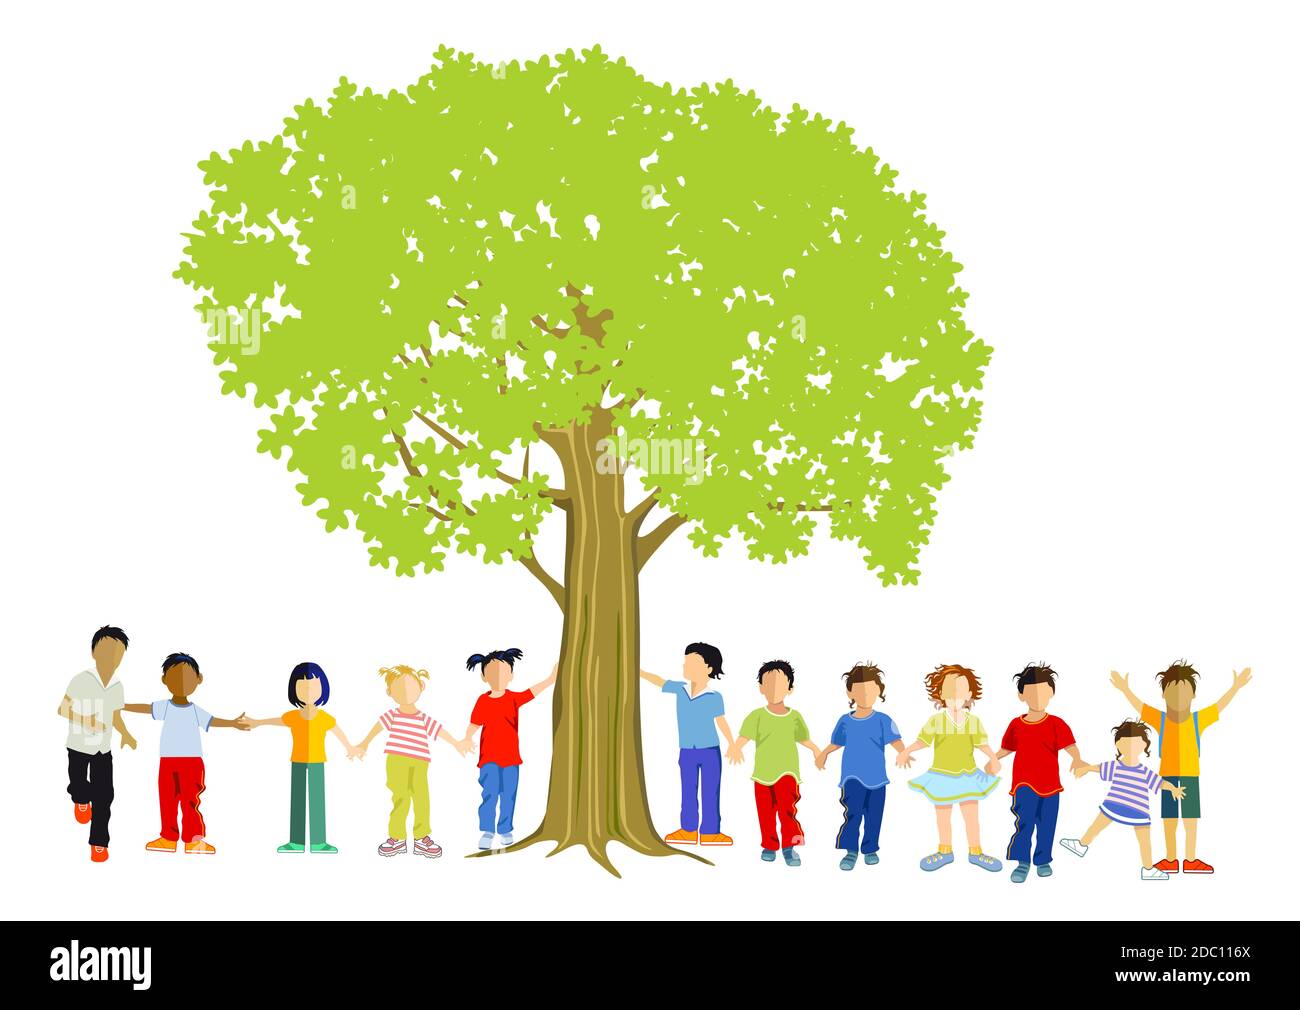 Happy children together under the tree Stock Photo